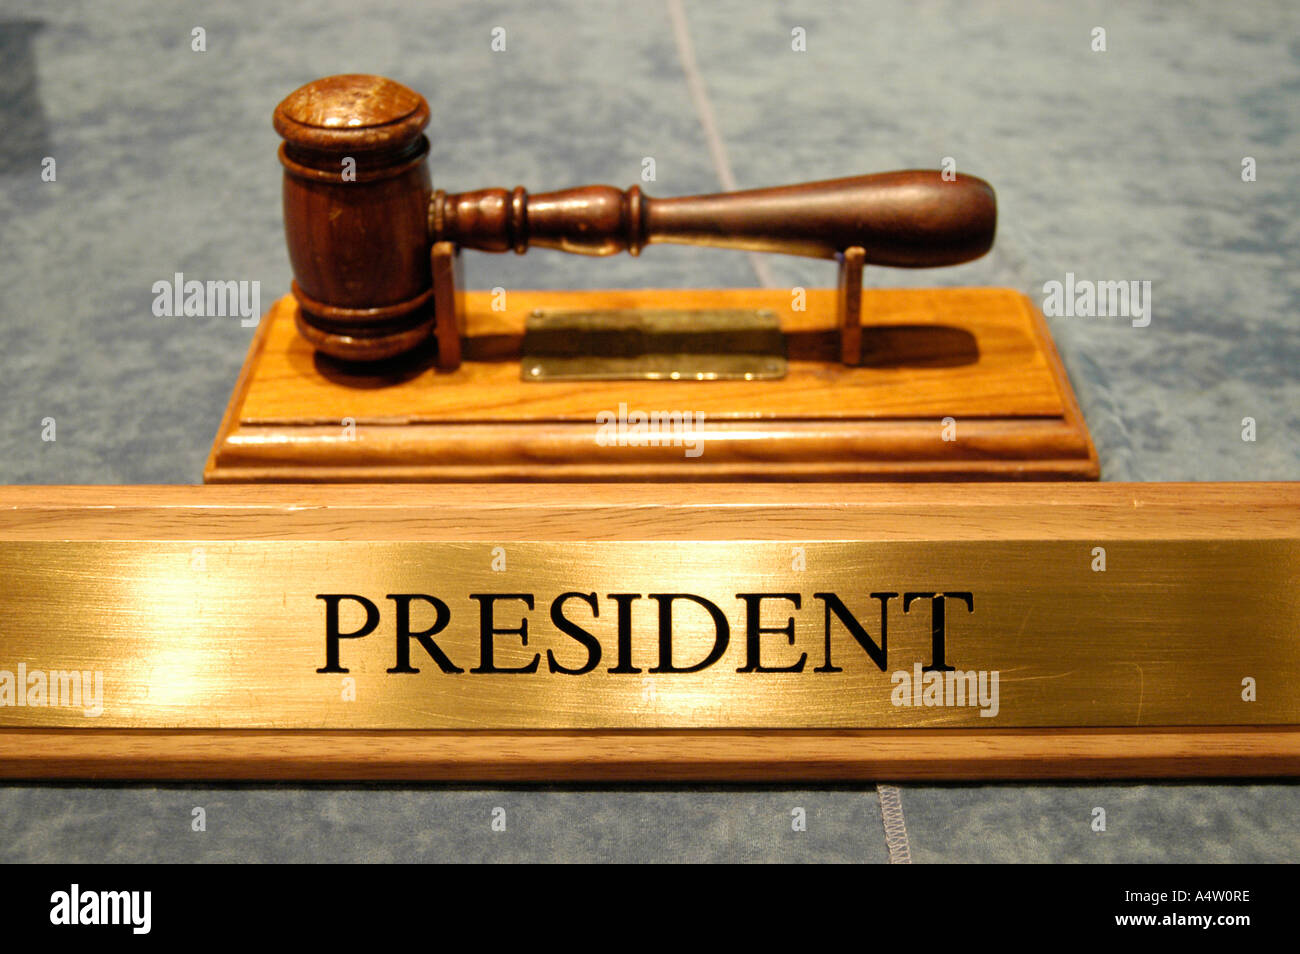 President title plate and hammer at company England Britain UK Stock Photo  - Alamy